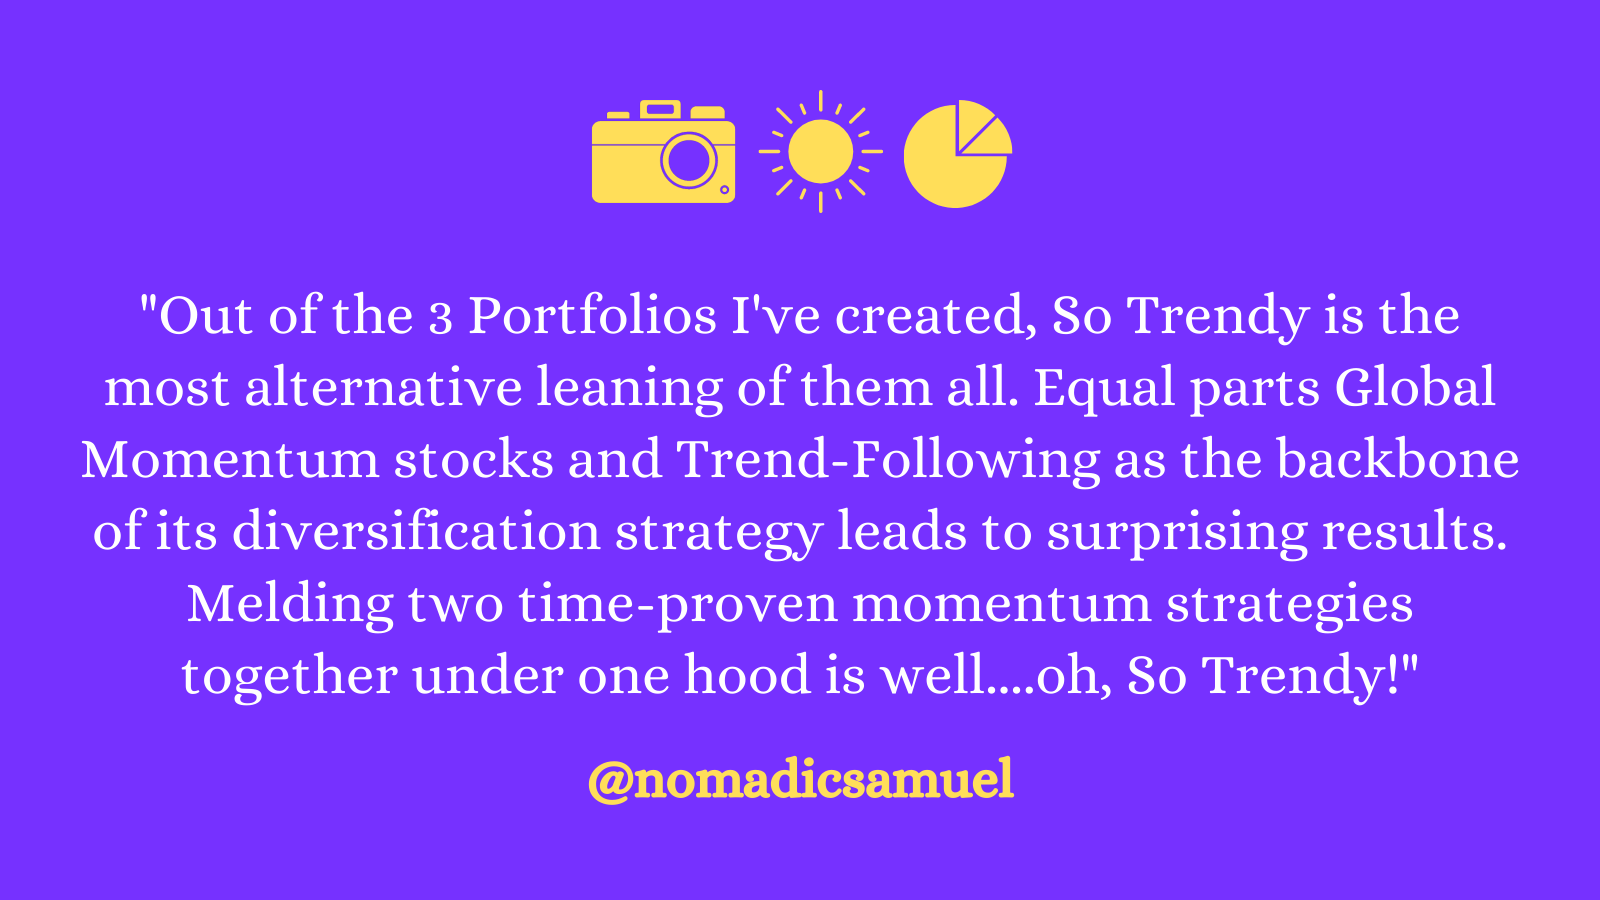 Out of the 3 Portfolios I've created, So Trendy is the most alternative leaning of them all. Equals parts Global Momentum stocks and Trend-Following as the backbone of its diversification strategy leads to surprising results. Melding two time-proven momentum strategies together under one hood is well...oh, So Trendy!